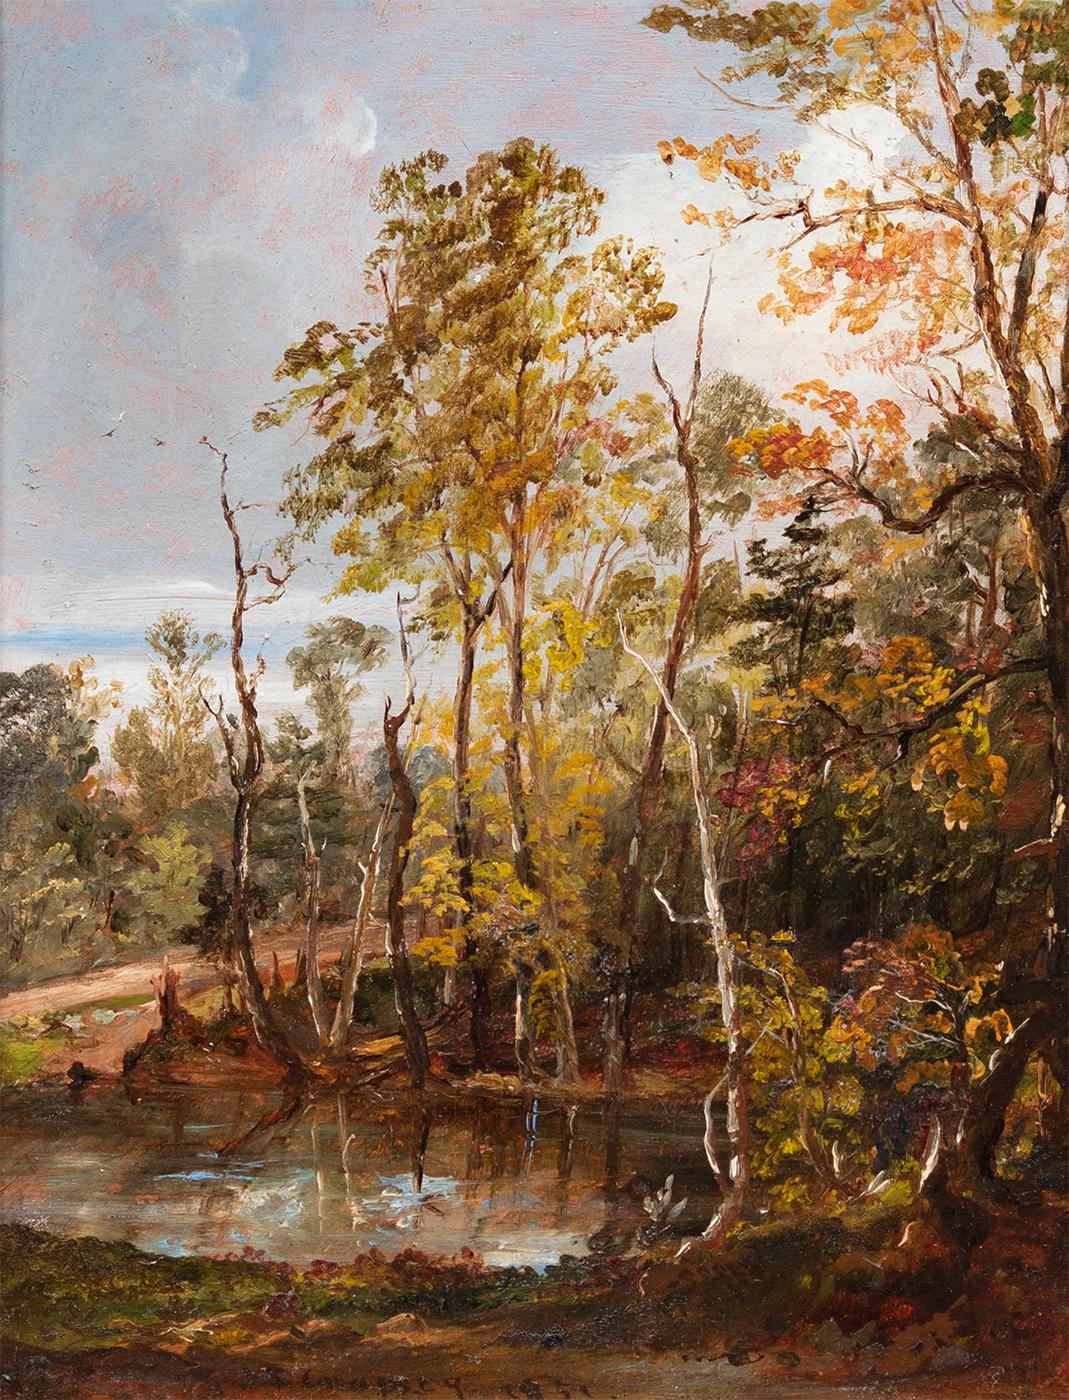 Autumn on Greenwood Lake 1861 Cattle Cows Boat Painting by Jasper Francis Cropsey Art Repro FREE Shipping in USA Best Quality Art in USA!